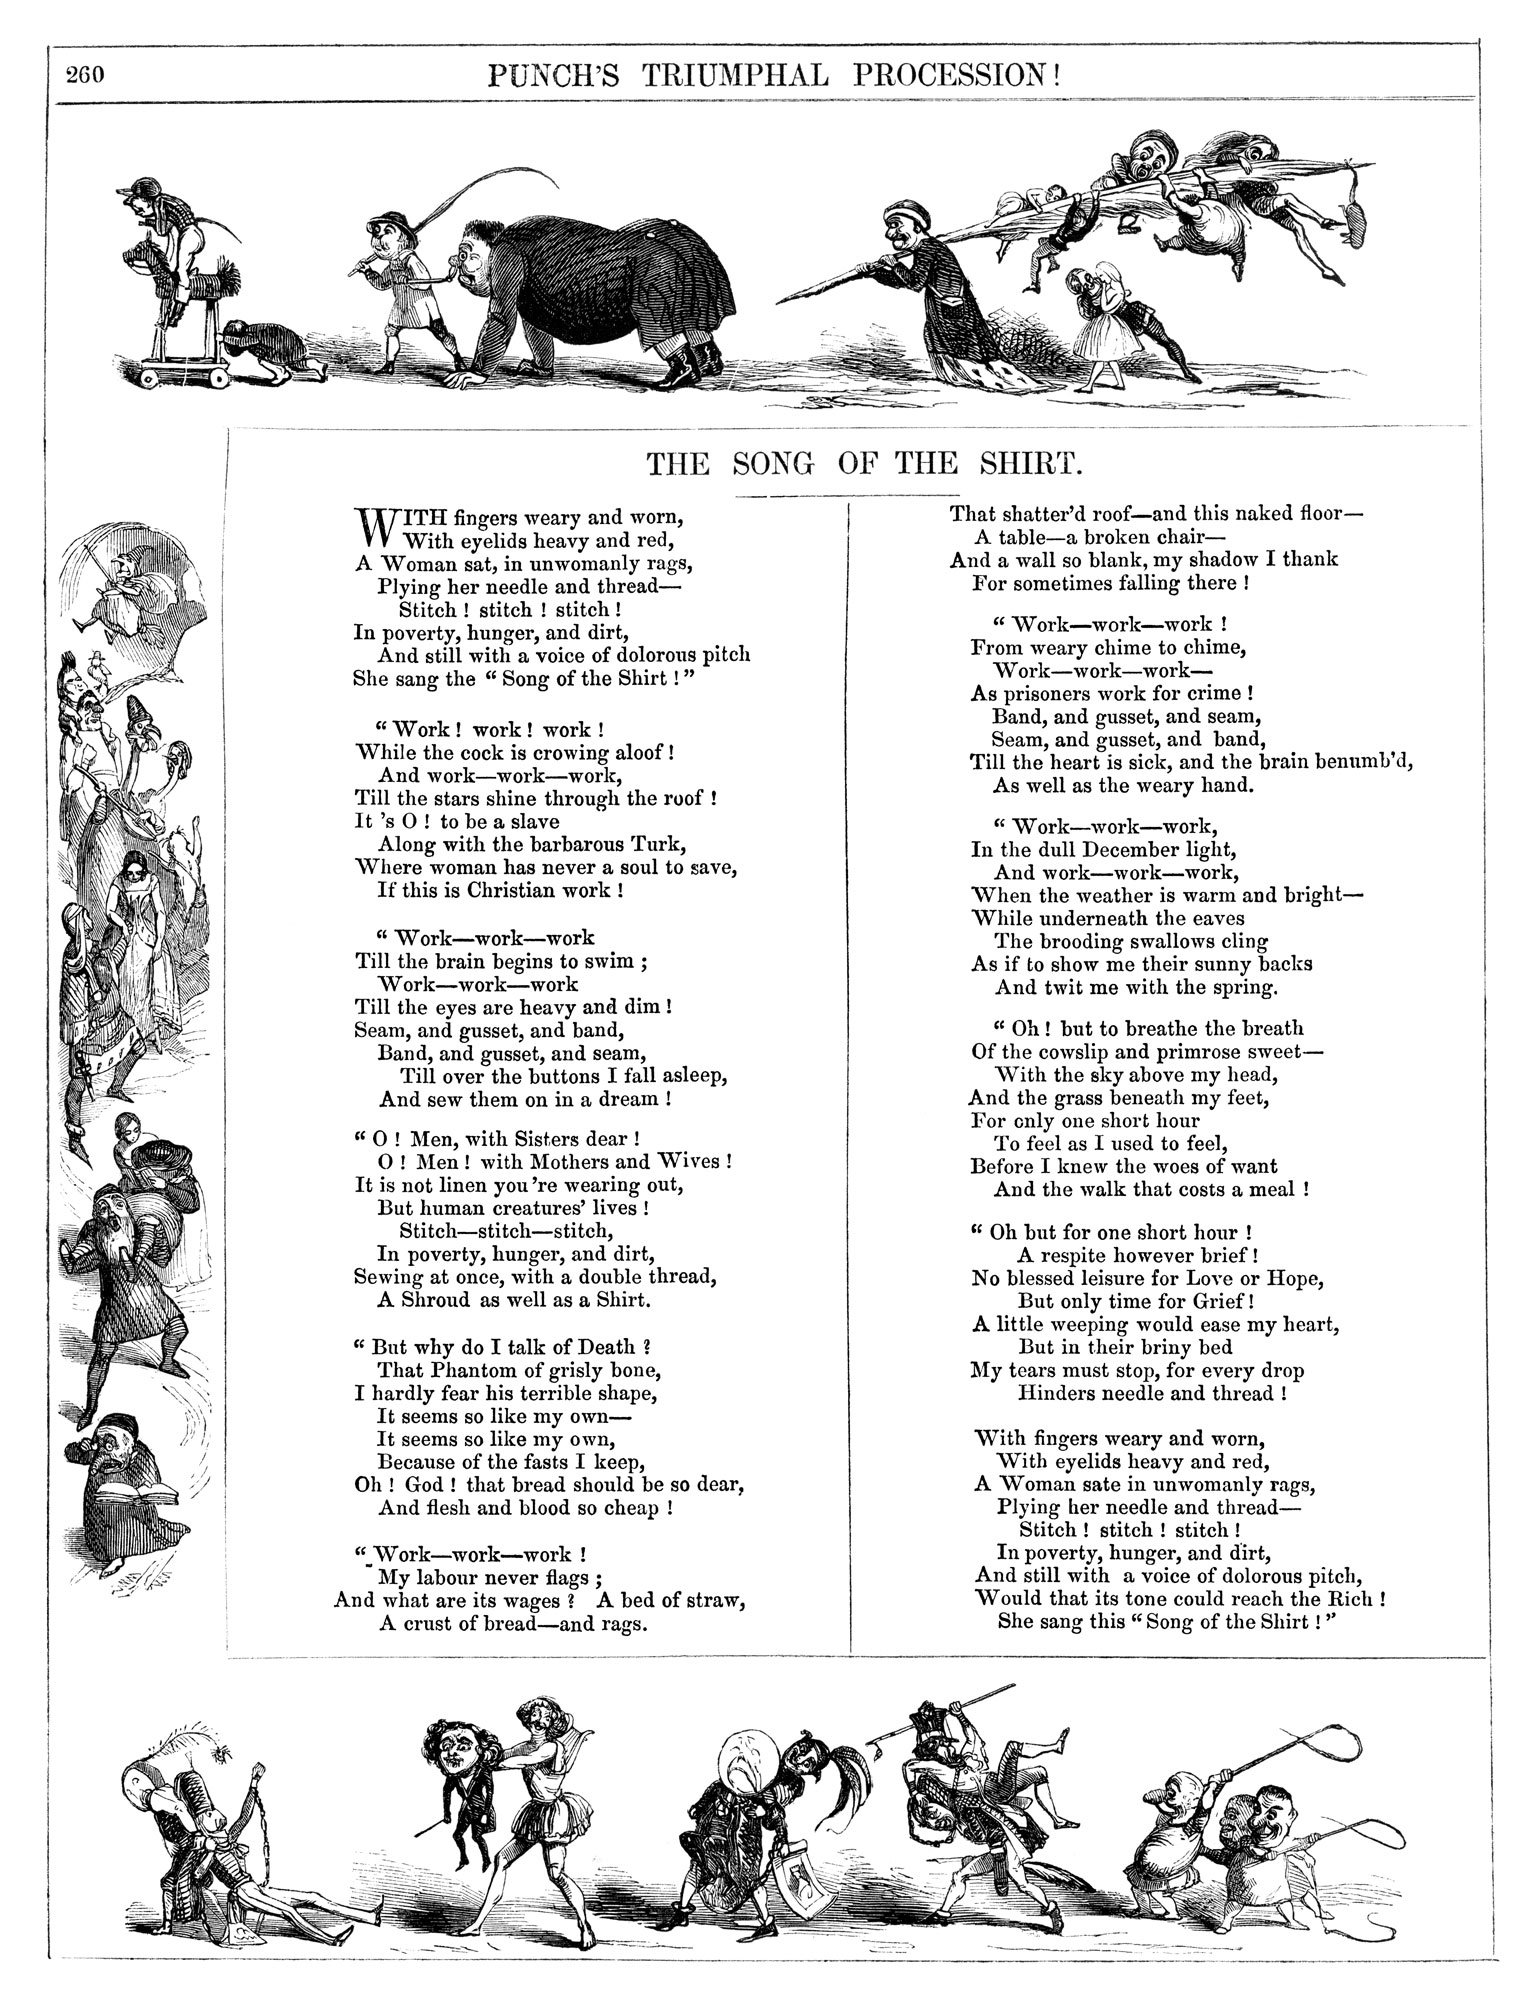 Thomas Hood's "Song of the Shirt" published in Punch Magazine, 1843.